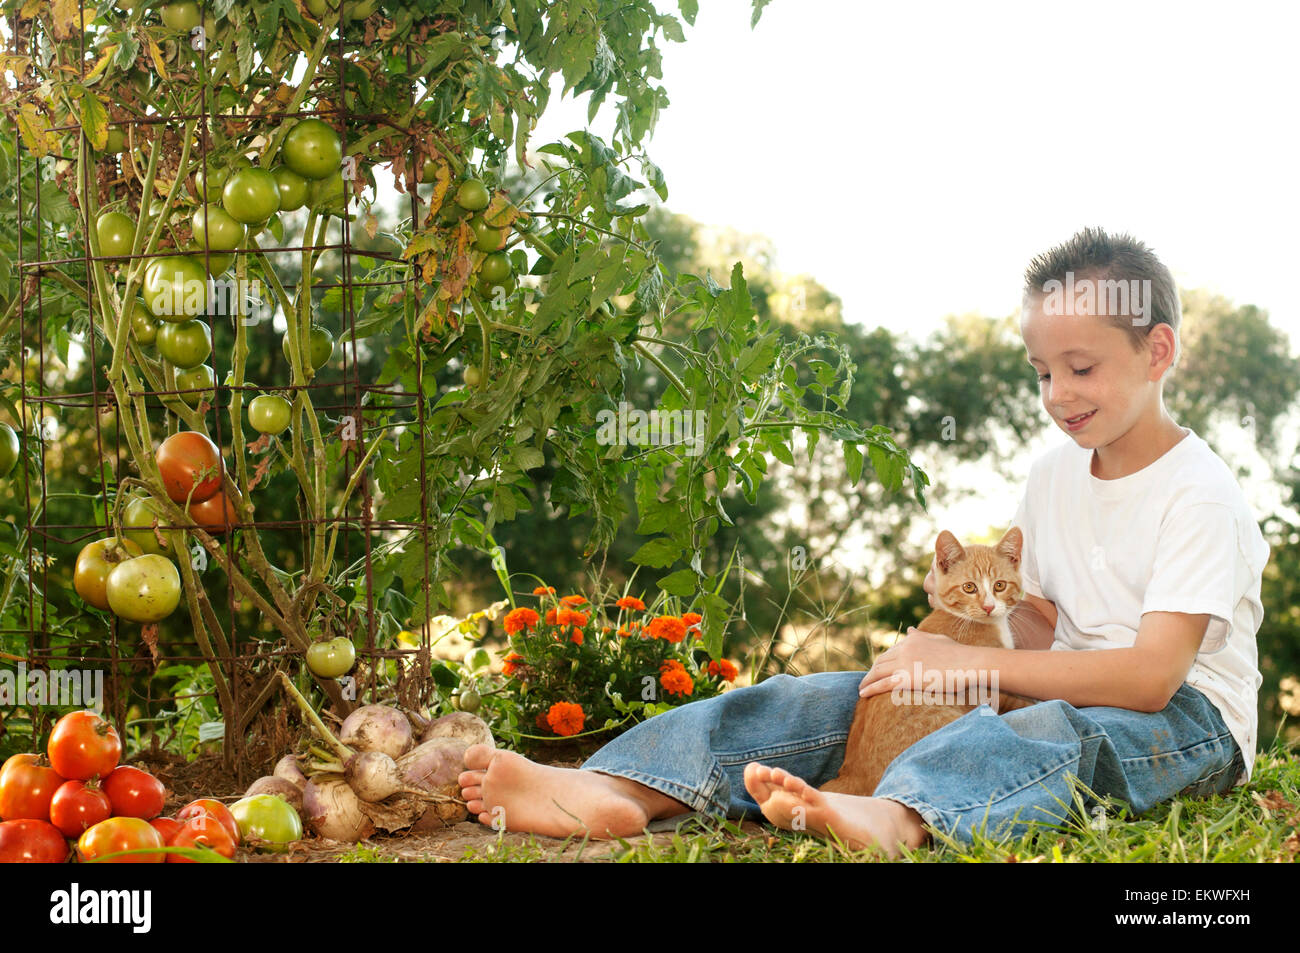 Boy in homegrown tomato garden holding cat Stock Photo